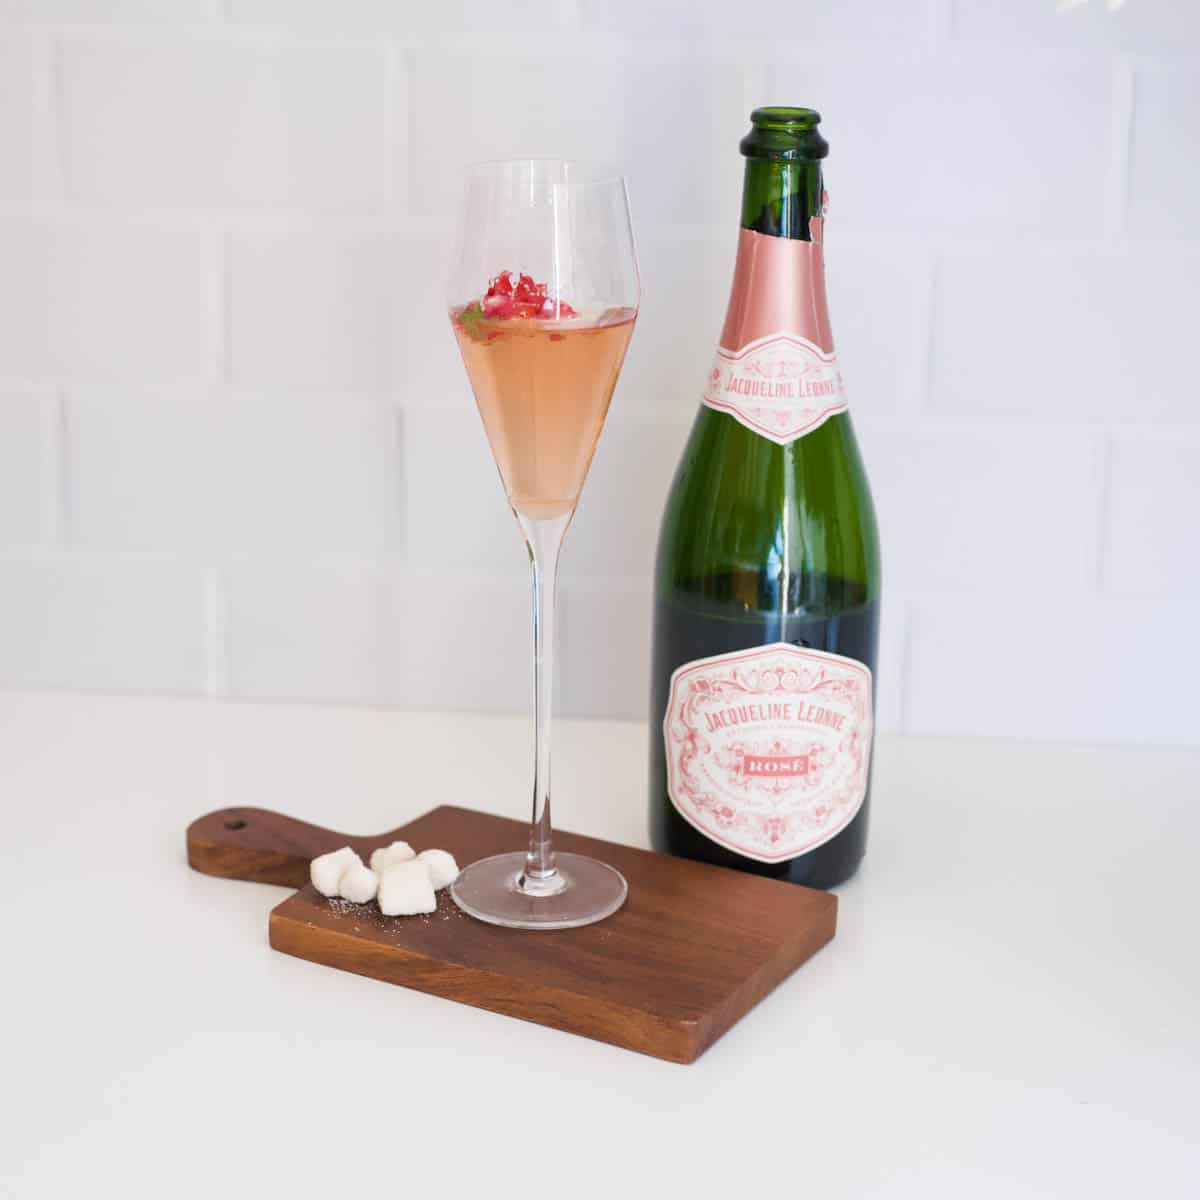 https://www.cupcakesandcutlery.com/wp-content/uploads/2023/05/classic-champagne-cocktail-featured-image.jpg